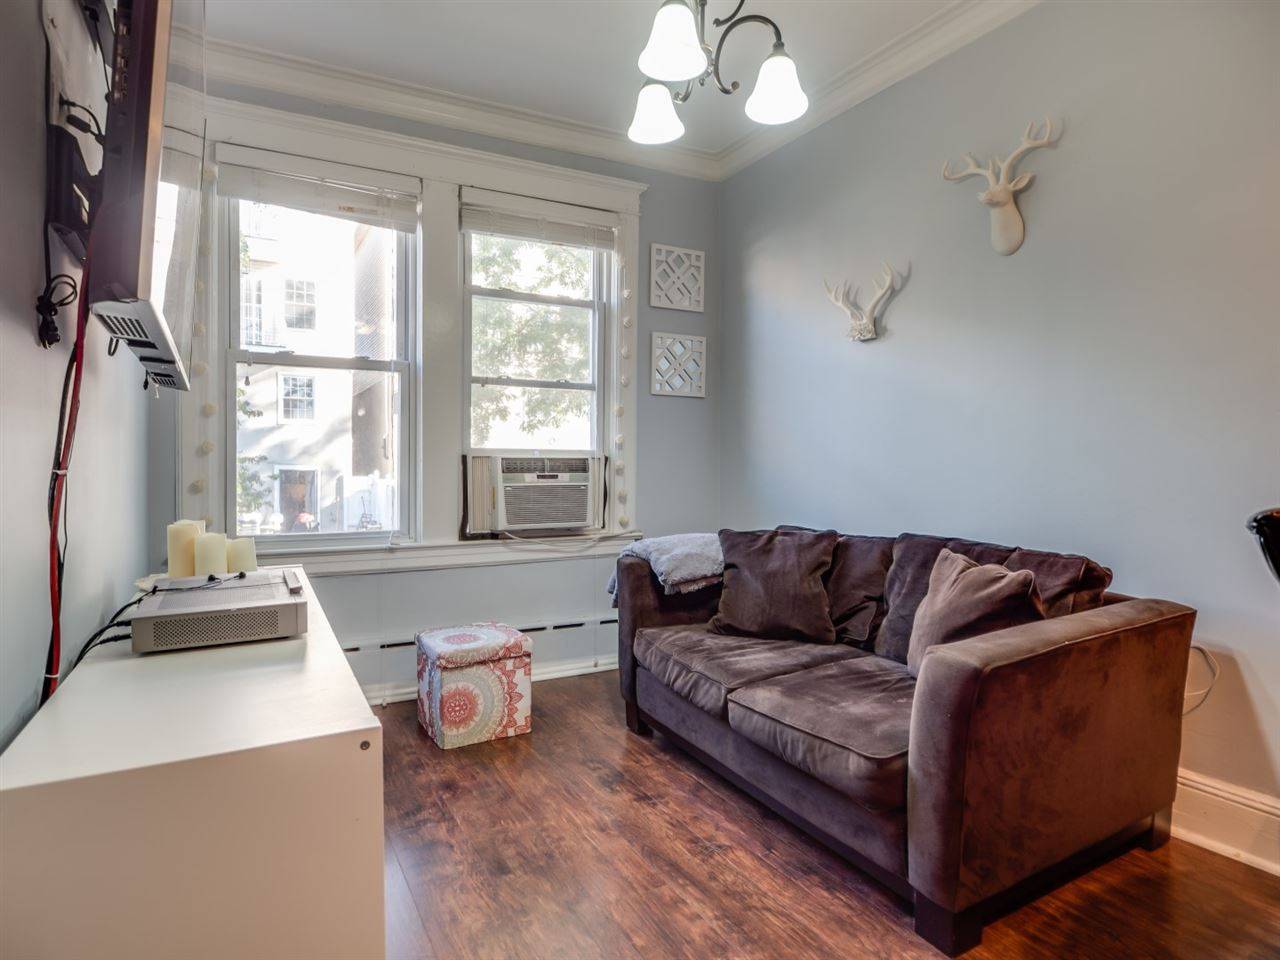 Bright and charming 2 bed 1 bath on the second floor of a well-maintained